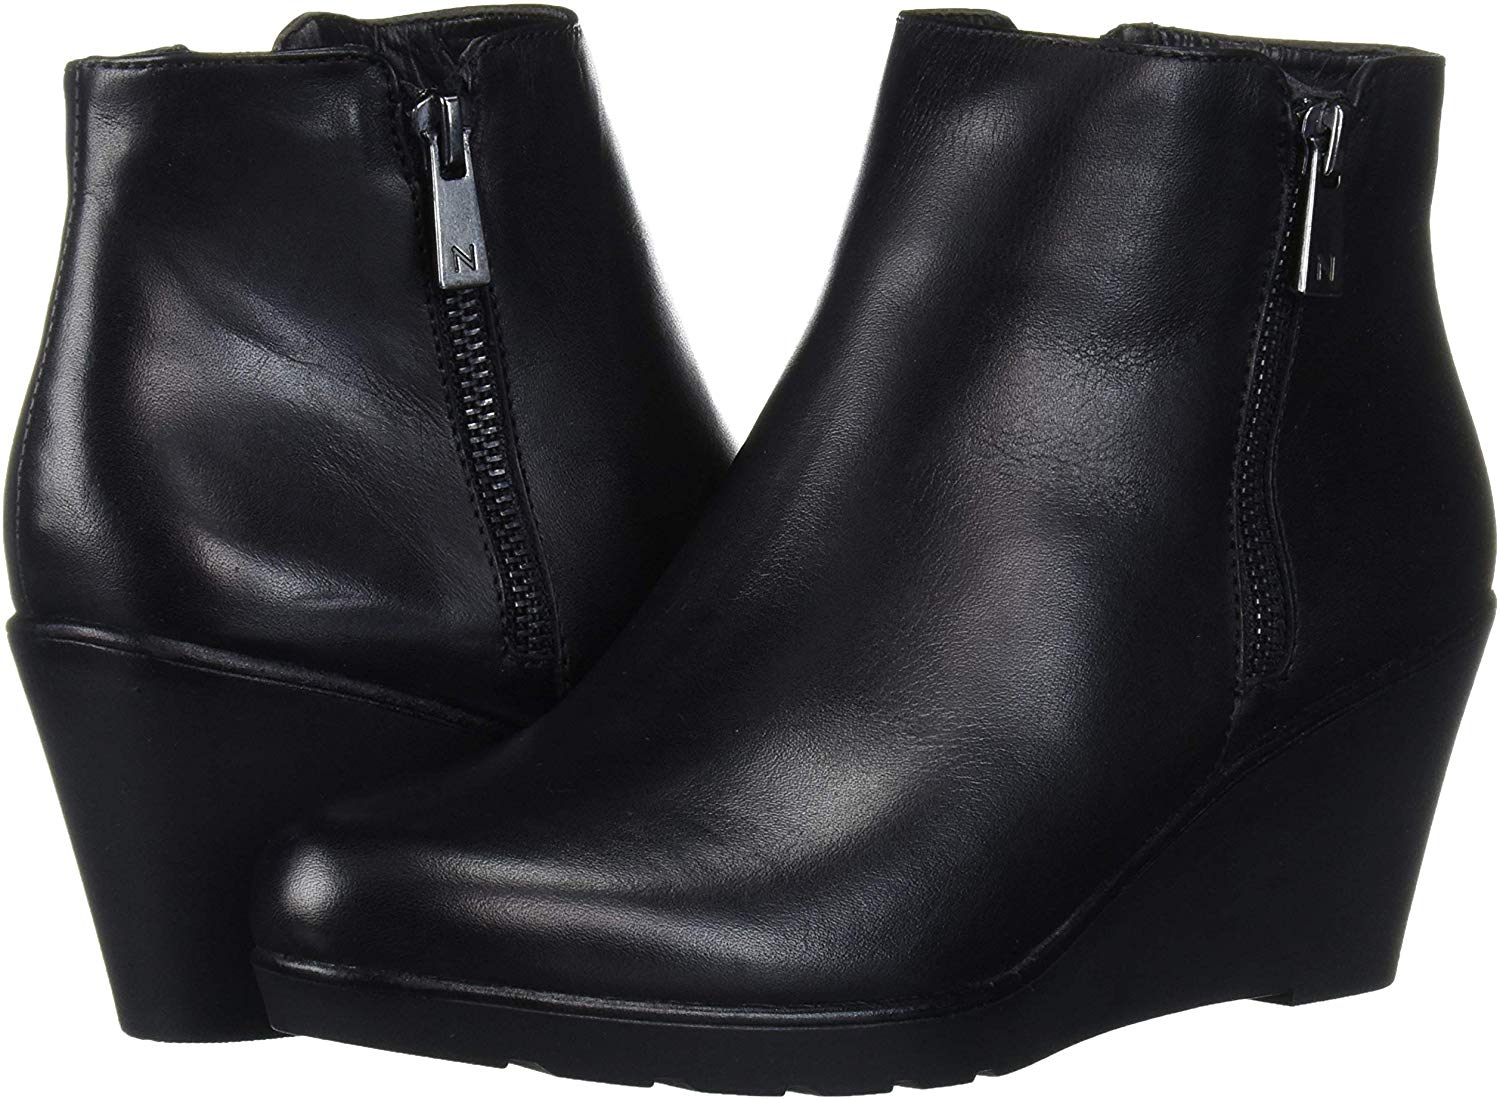 Naturalizer Women's Landry Booties Ankle Boot, Black Leather, Size 9.0